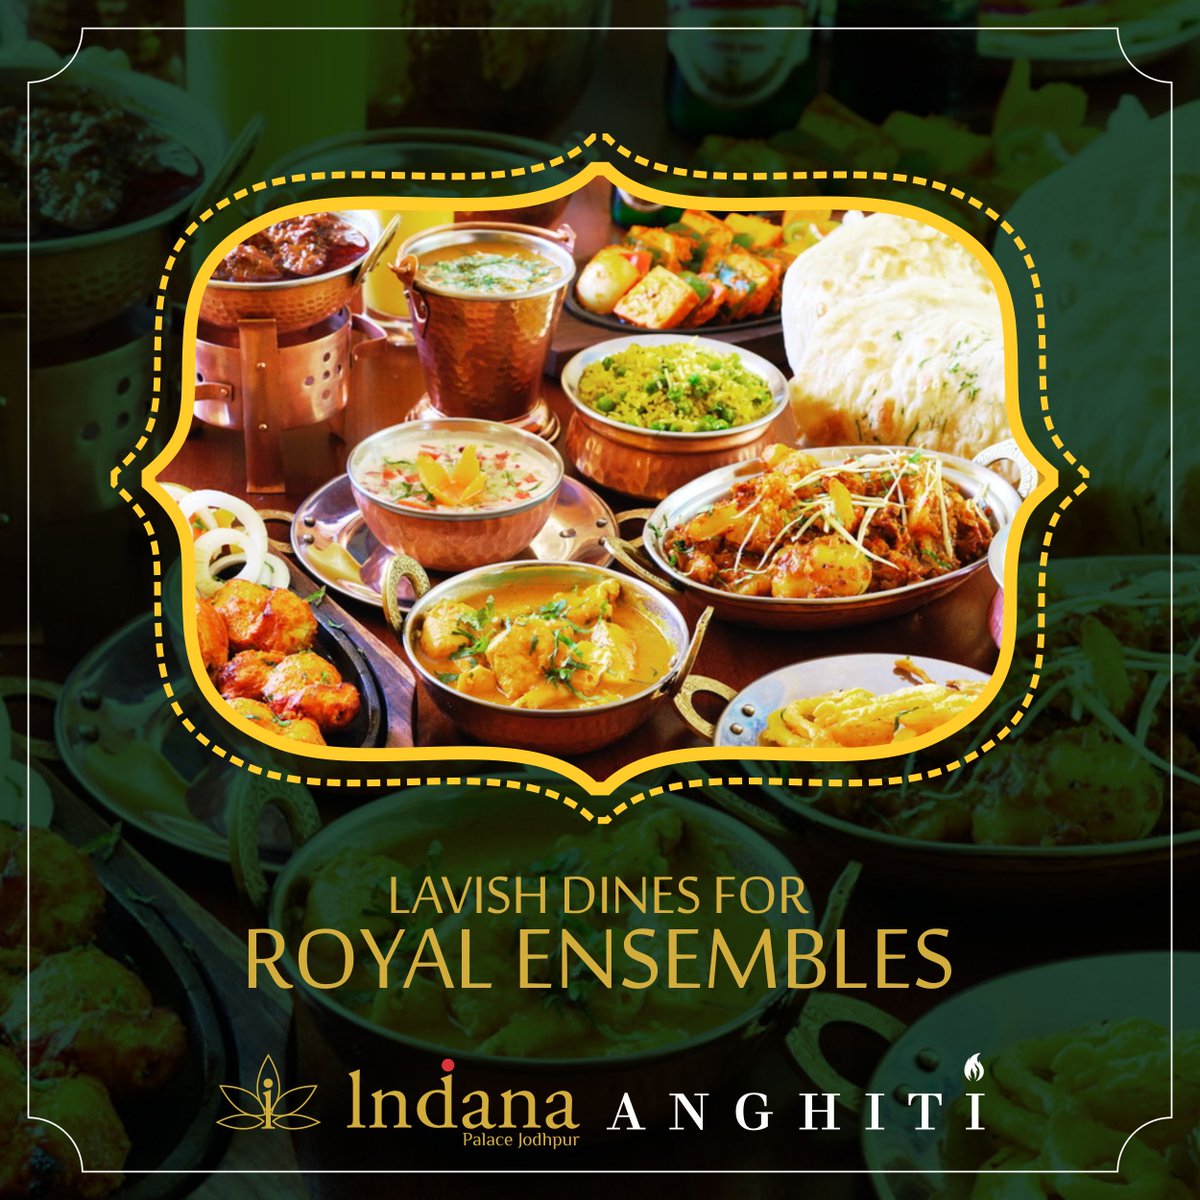 Engage into the most lavish dining experience for your royal ensembles at Saffron of Indana Palace Jodhpur and mark your gatherings so as to be filled with scrumptious food.

For more information: 0291-7184888 / 0291-297095

#IndanaPalaceJodhpur #Jodhpur #LavishDine #Saffron